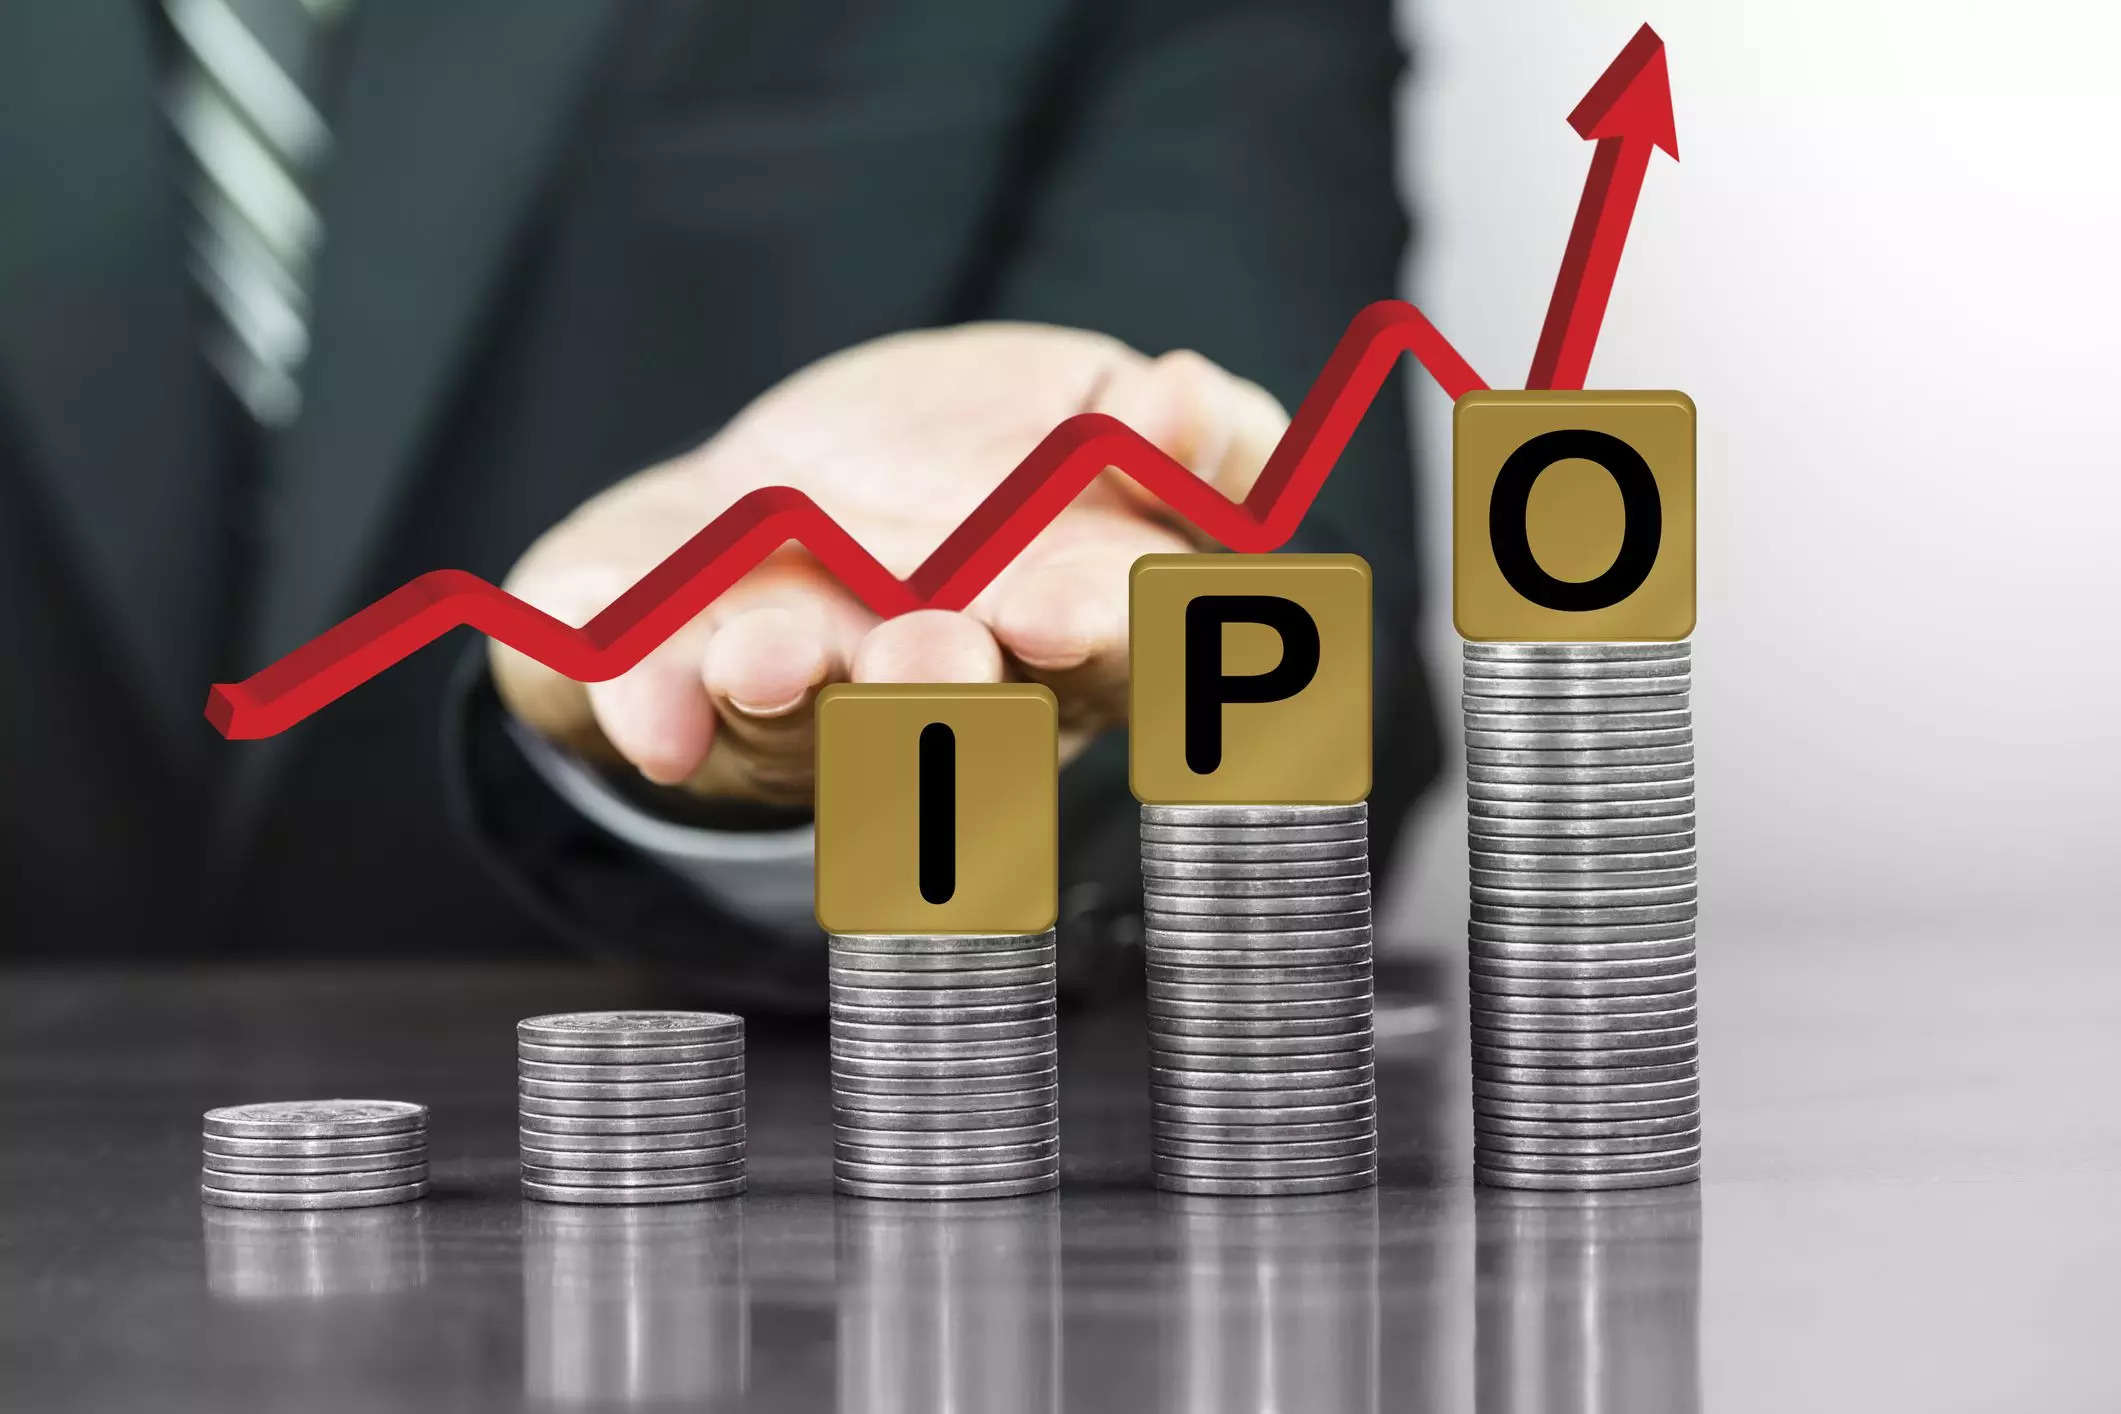 
Looking to invest in IPOs? Here’s how to pick winners and spot the duds
